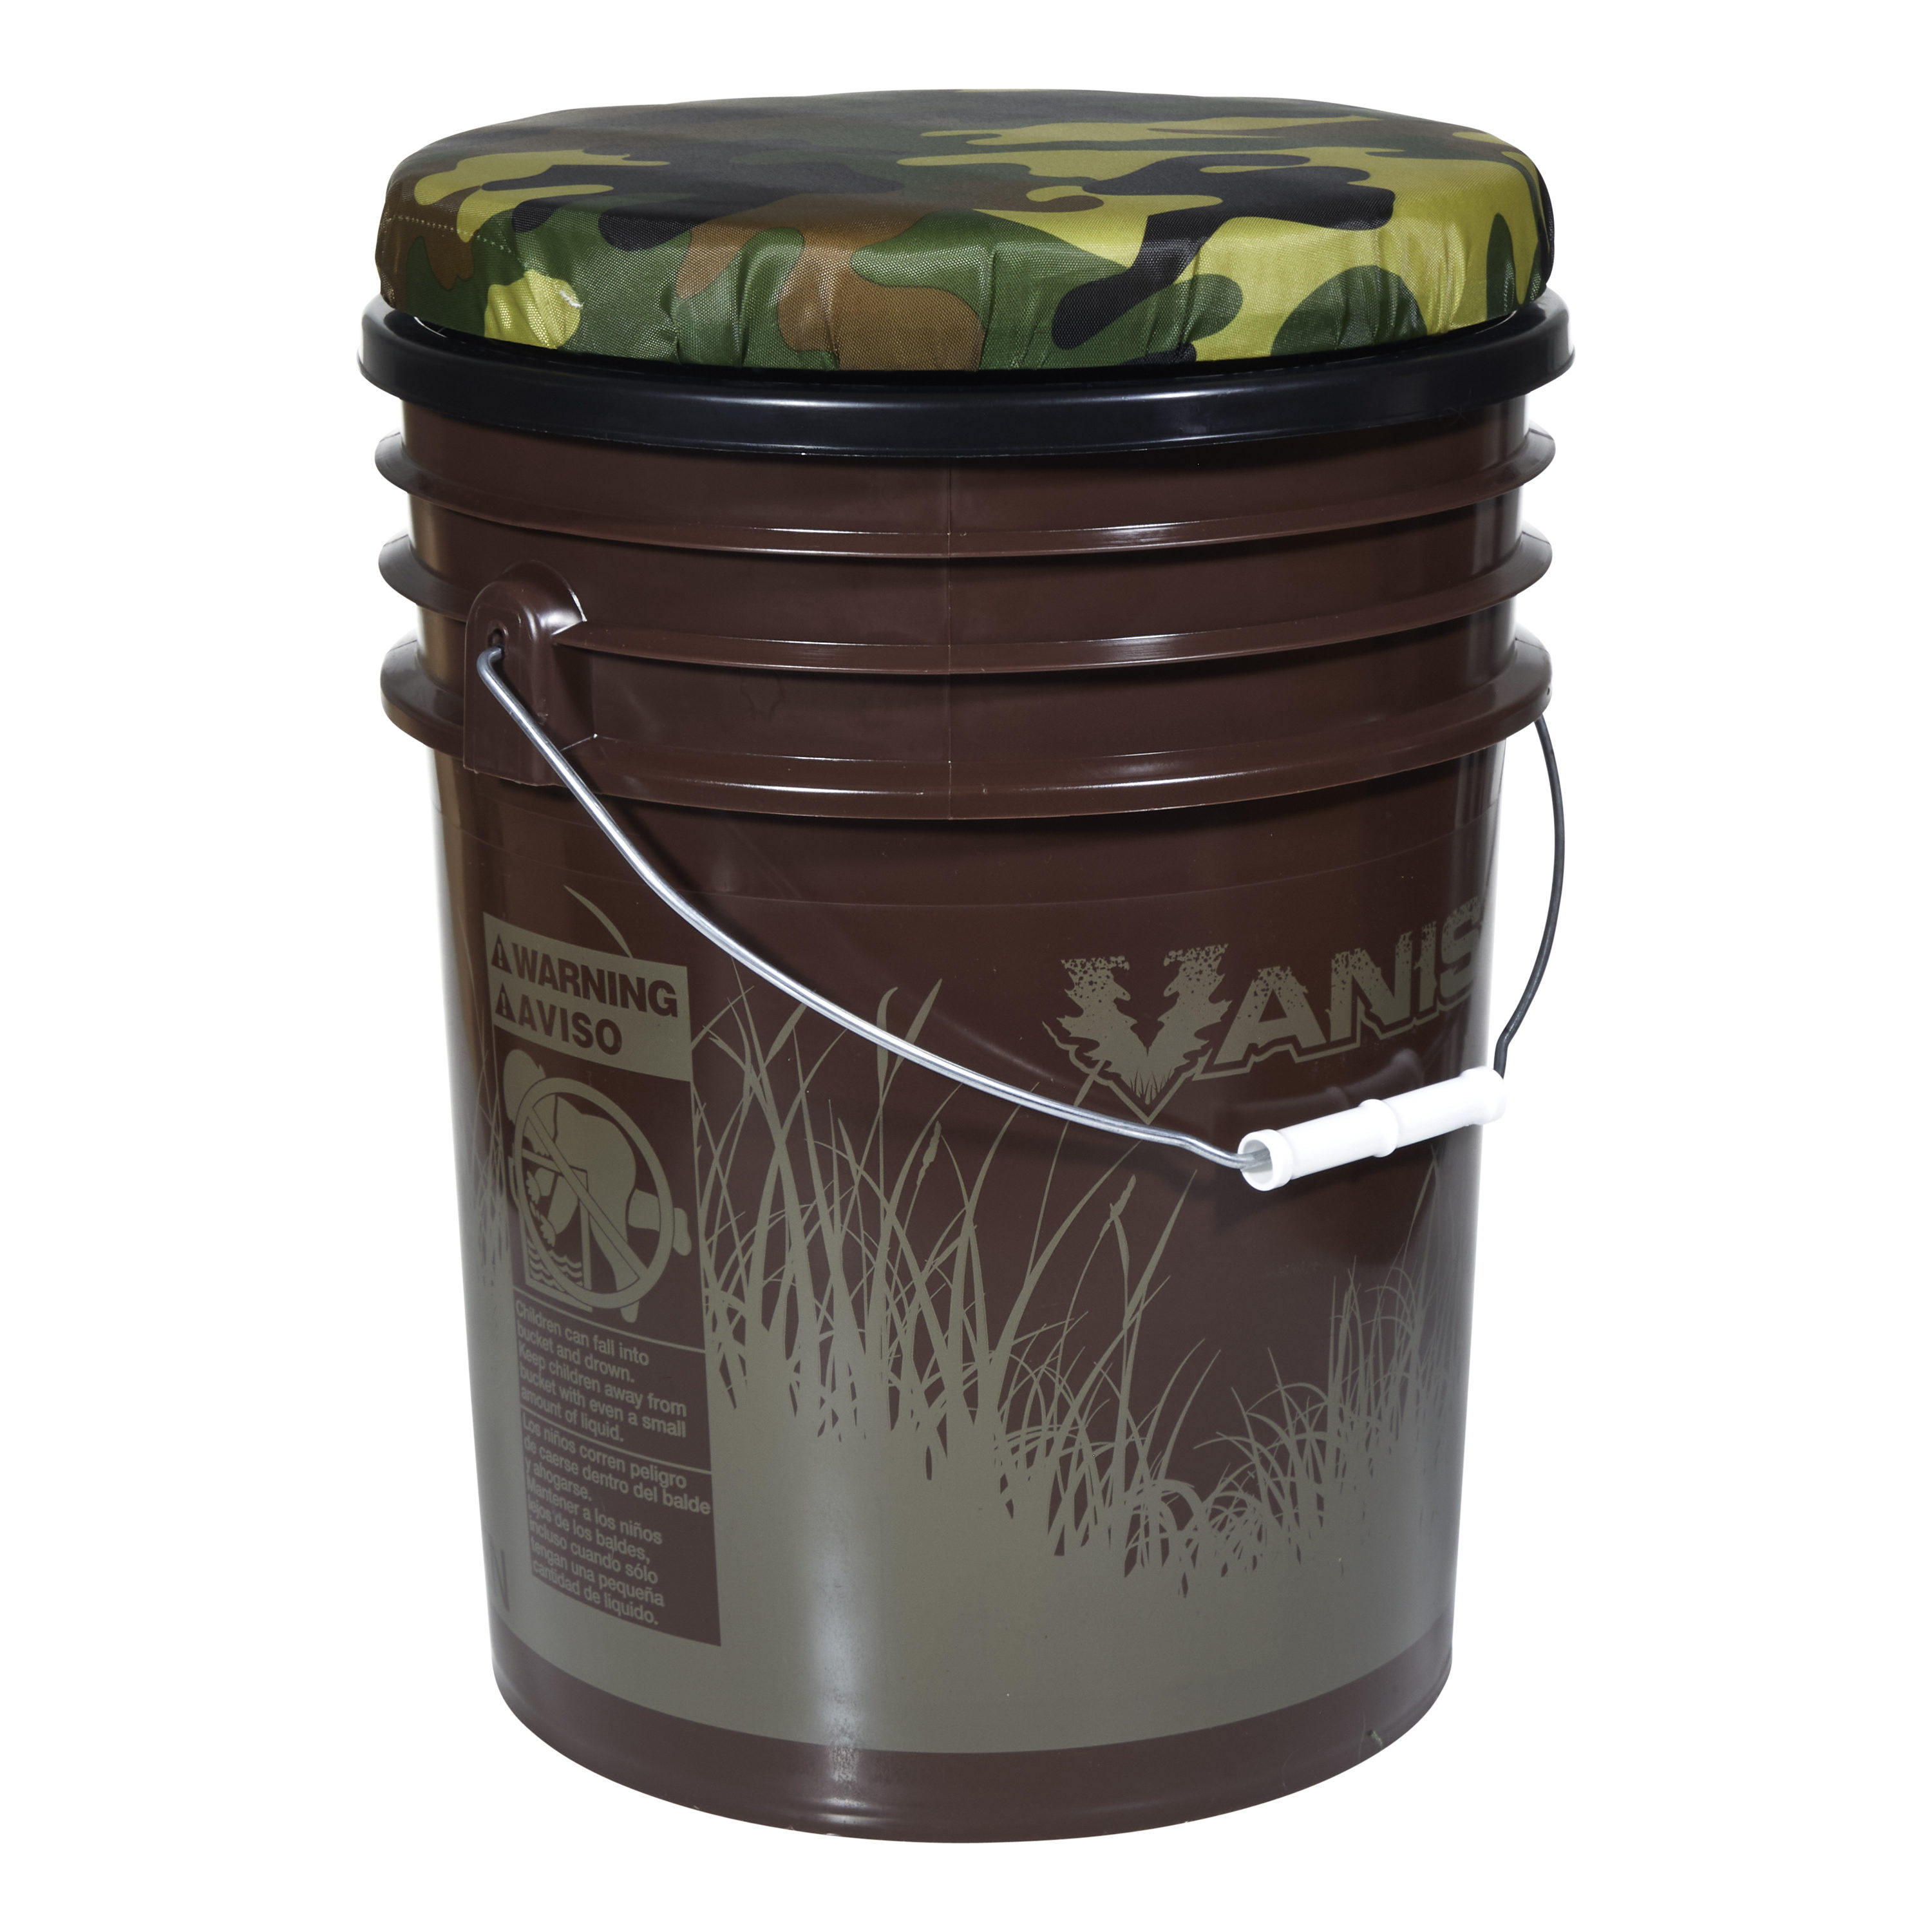  WarBull Bucket Seat 5 Gallon, 360-Degree Swivel Bucket Cushion,  Shadow Grass Camo Padded Bucket Lid, for Hunting, Ice Fishing, Gardening  and Camping, Quiet, Comfortable, Waterproof : Sports & Outdoors